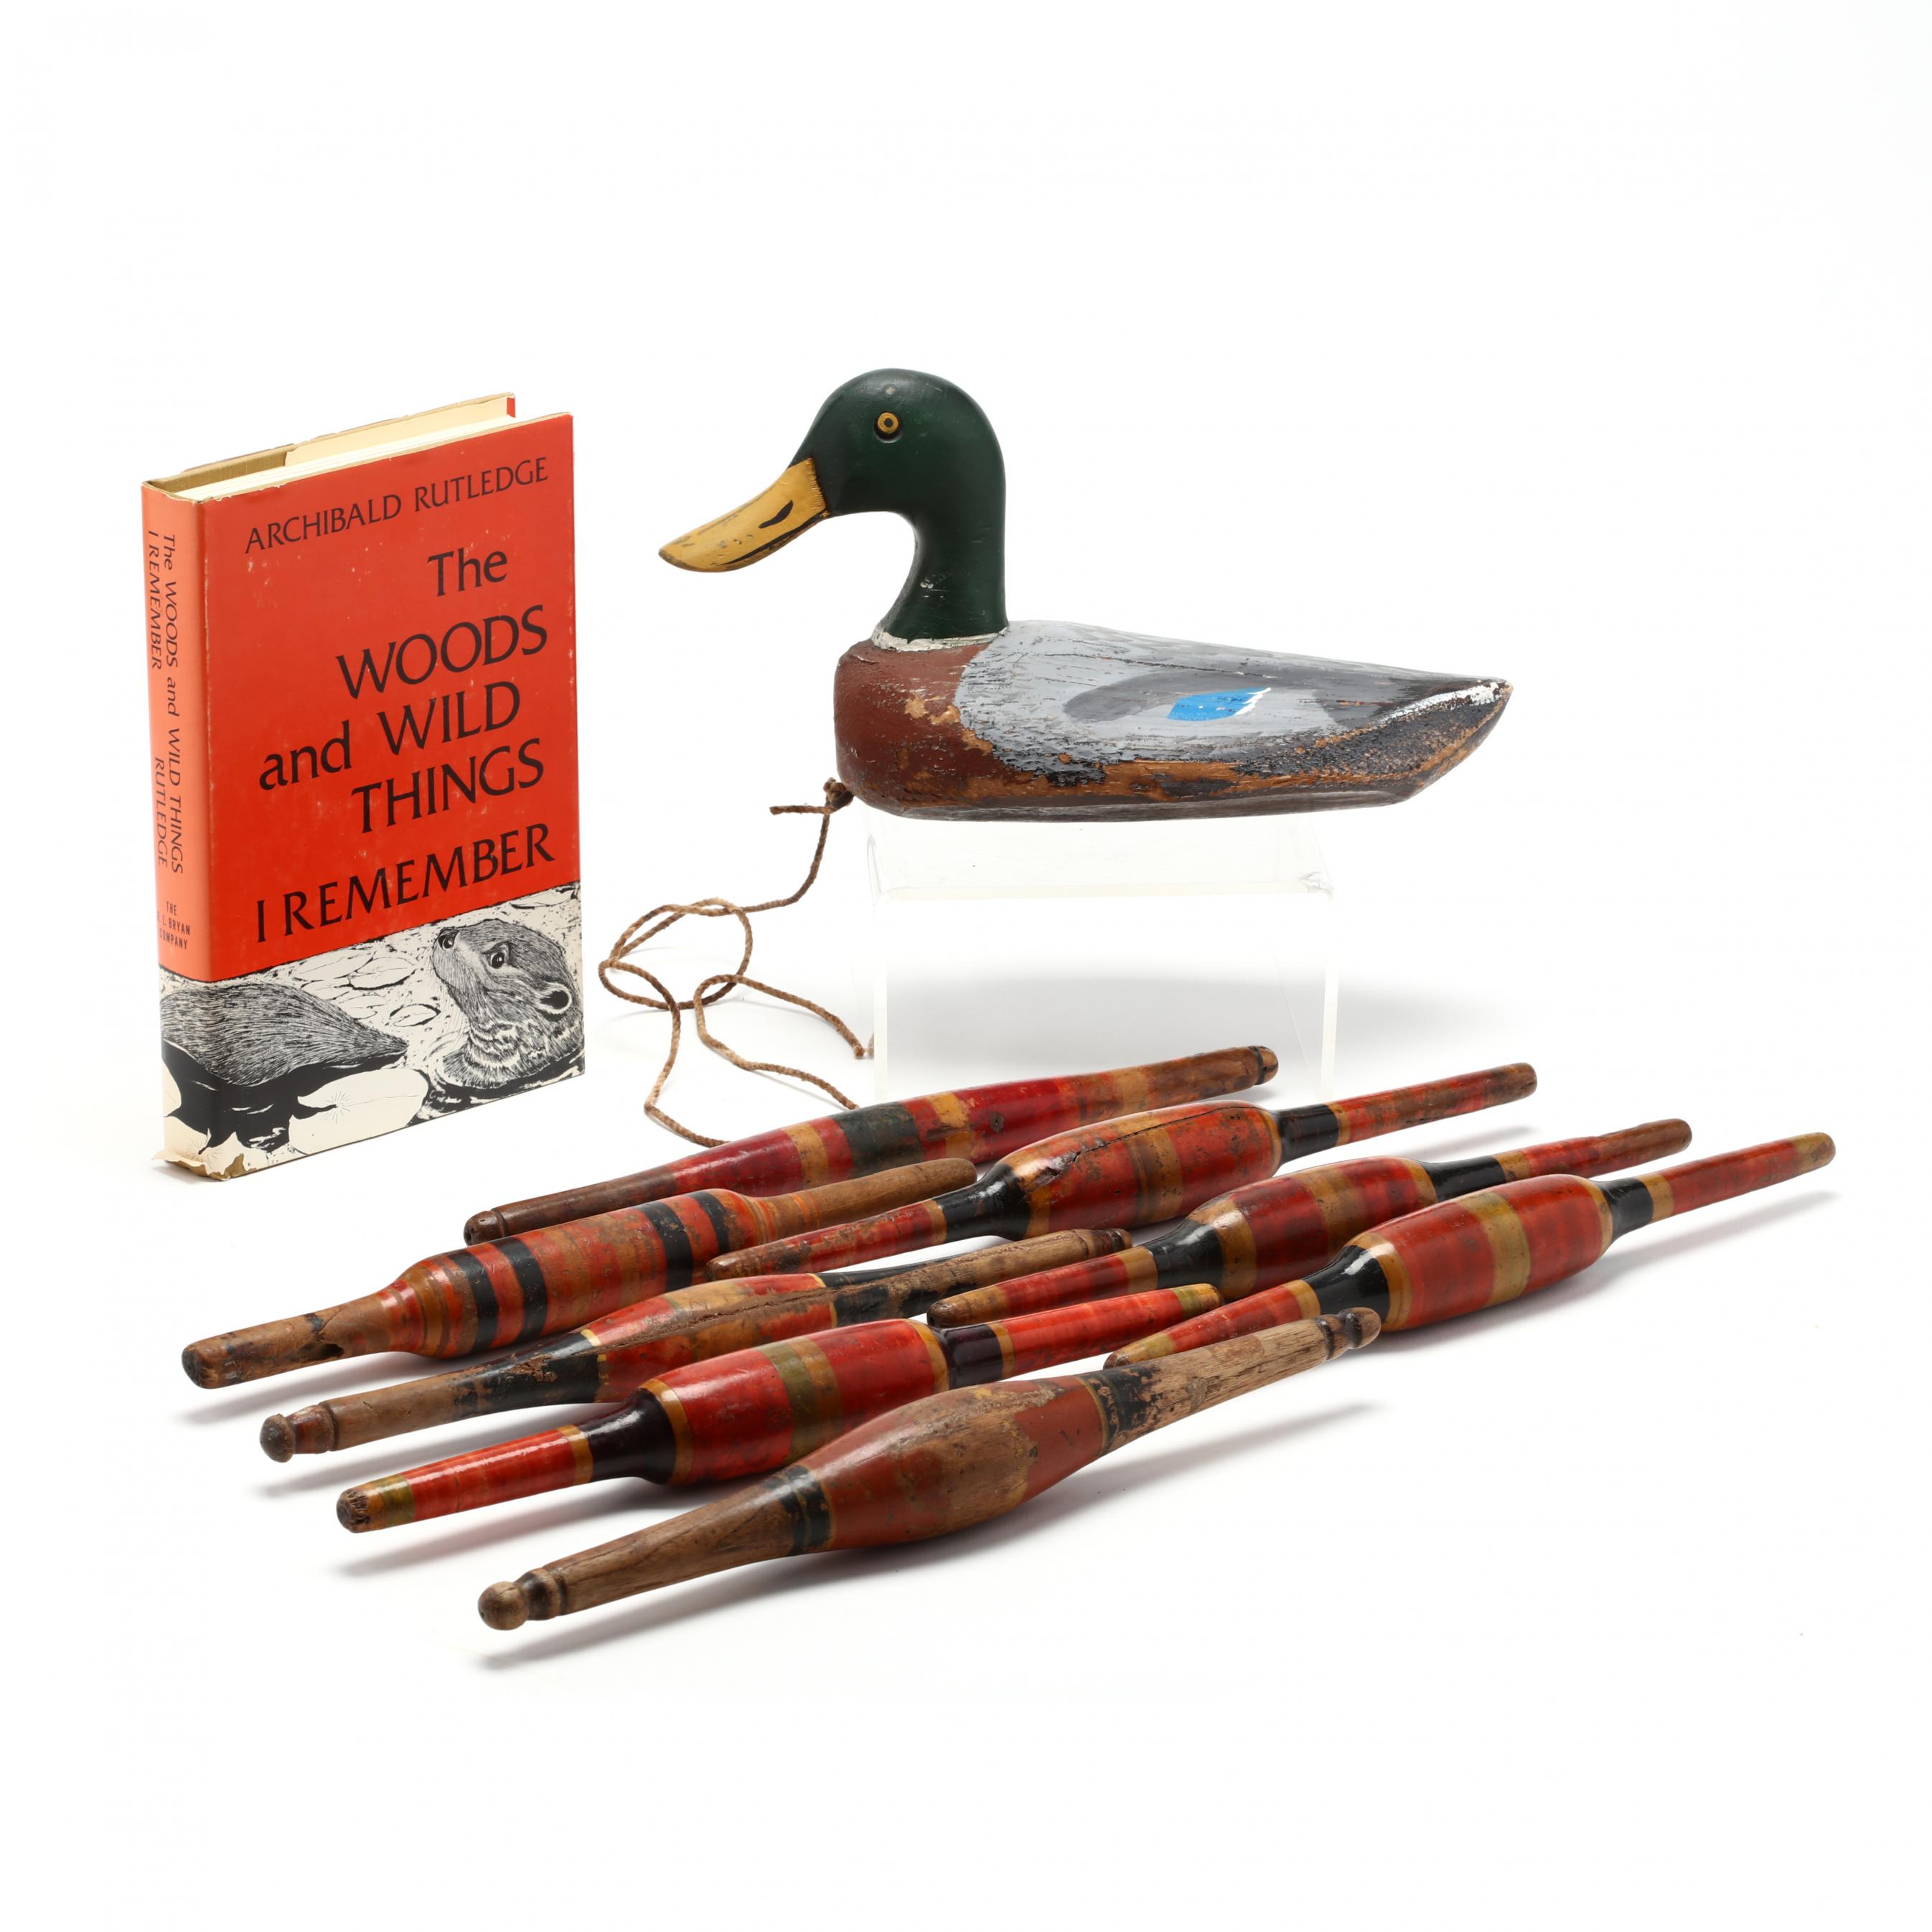 Palm Frond Mallard Decoy, Vintage Fishing Bobbers and Archibald Rutledge  Memoir (Lot 1071 - From the Personal Collection of Bob TimberlakeNov 14,  2020, 9:00am)